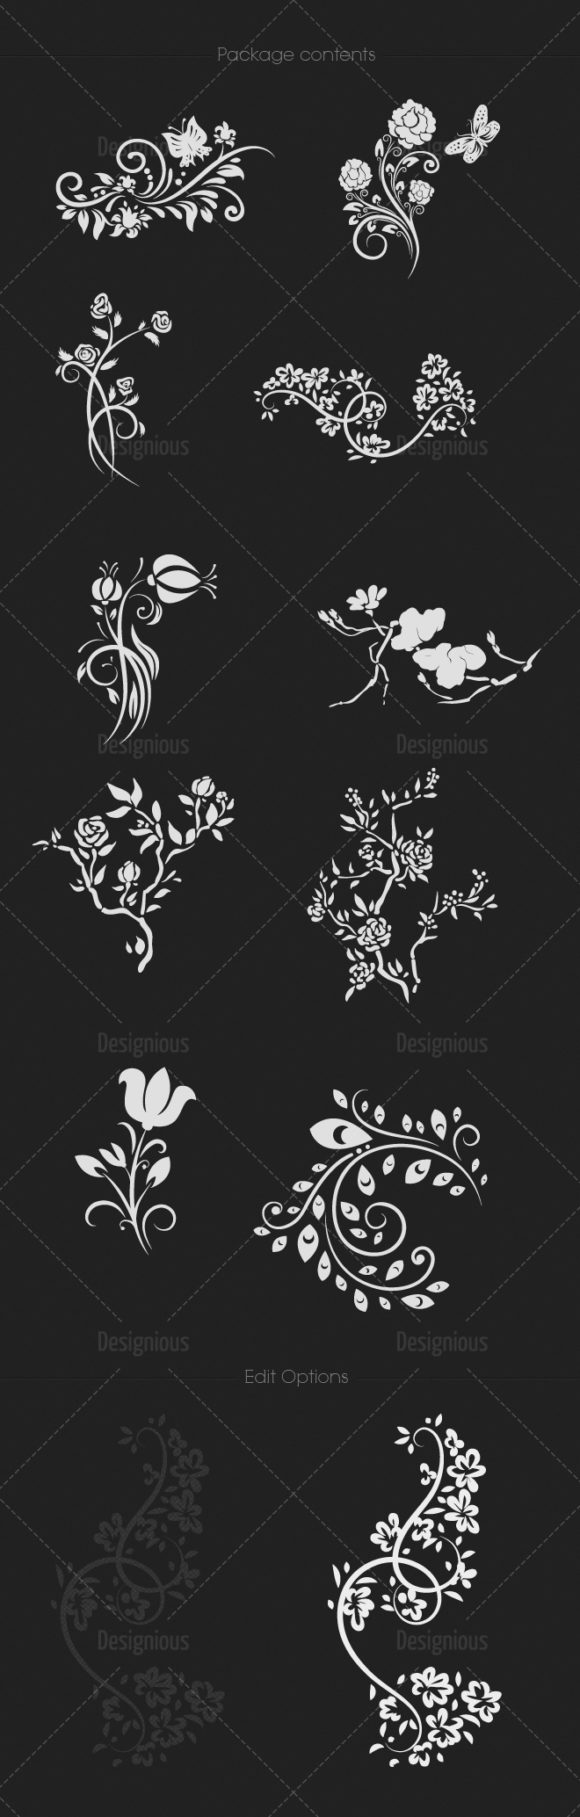 Chinese Ornaments Vector Pack 1 2